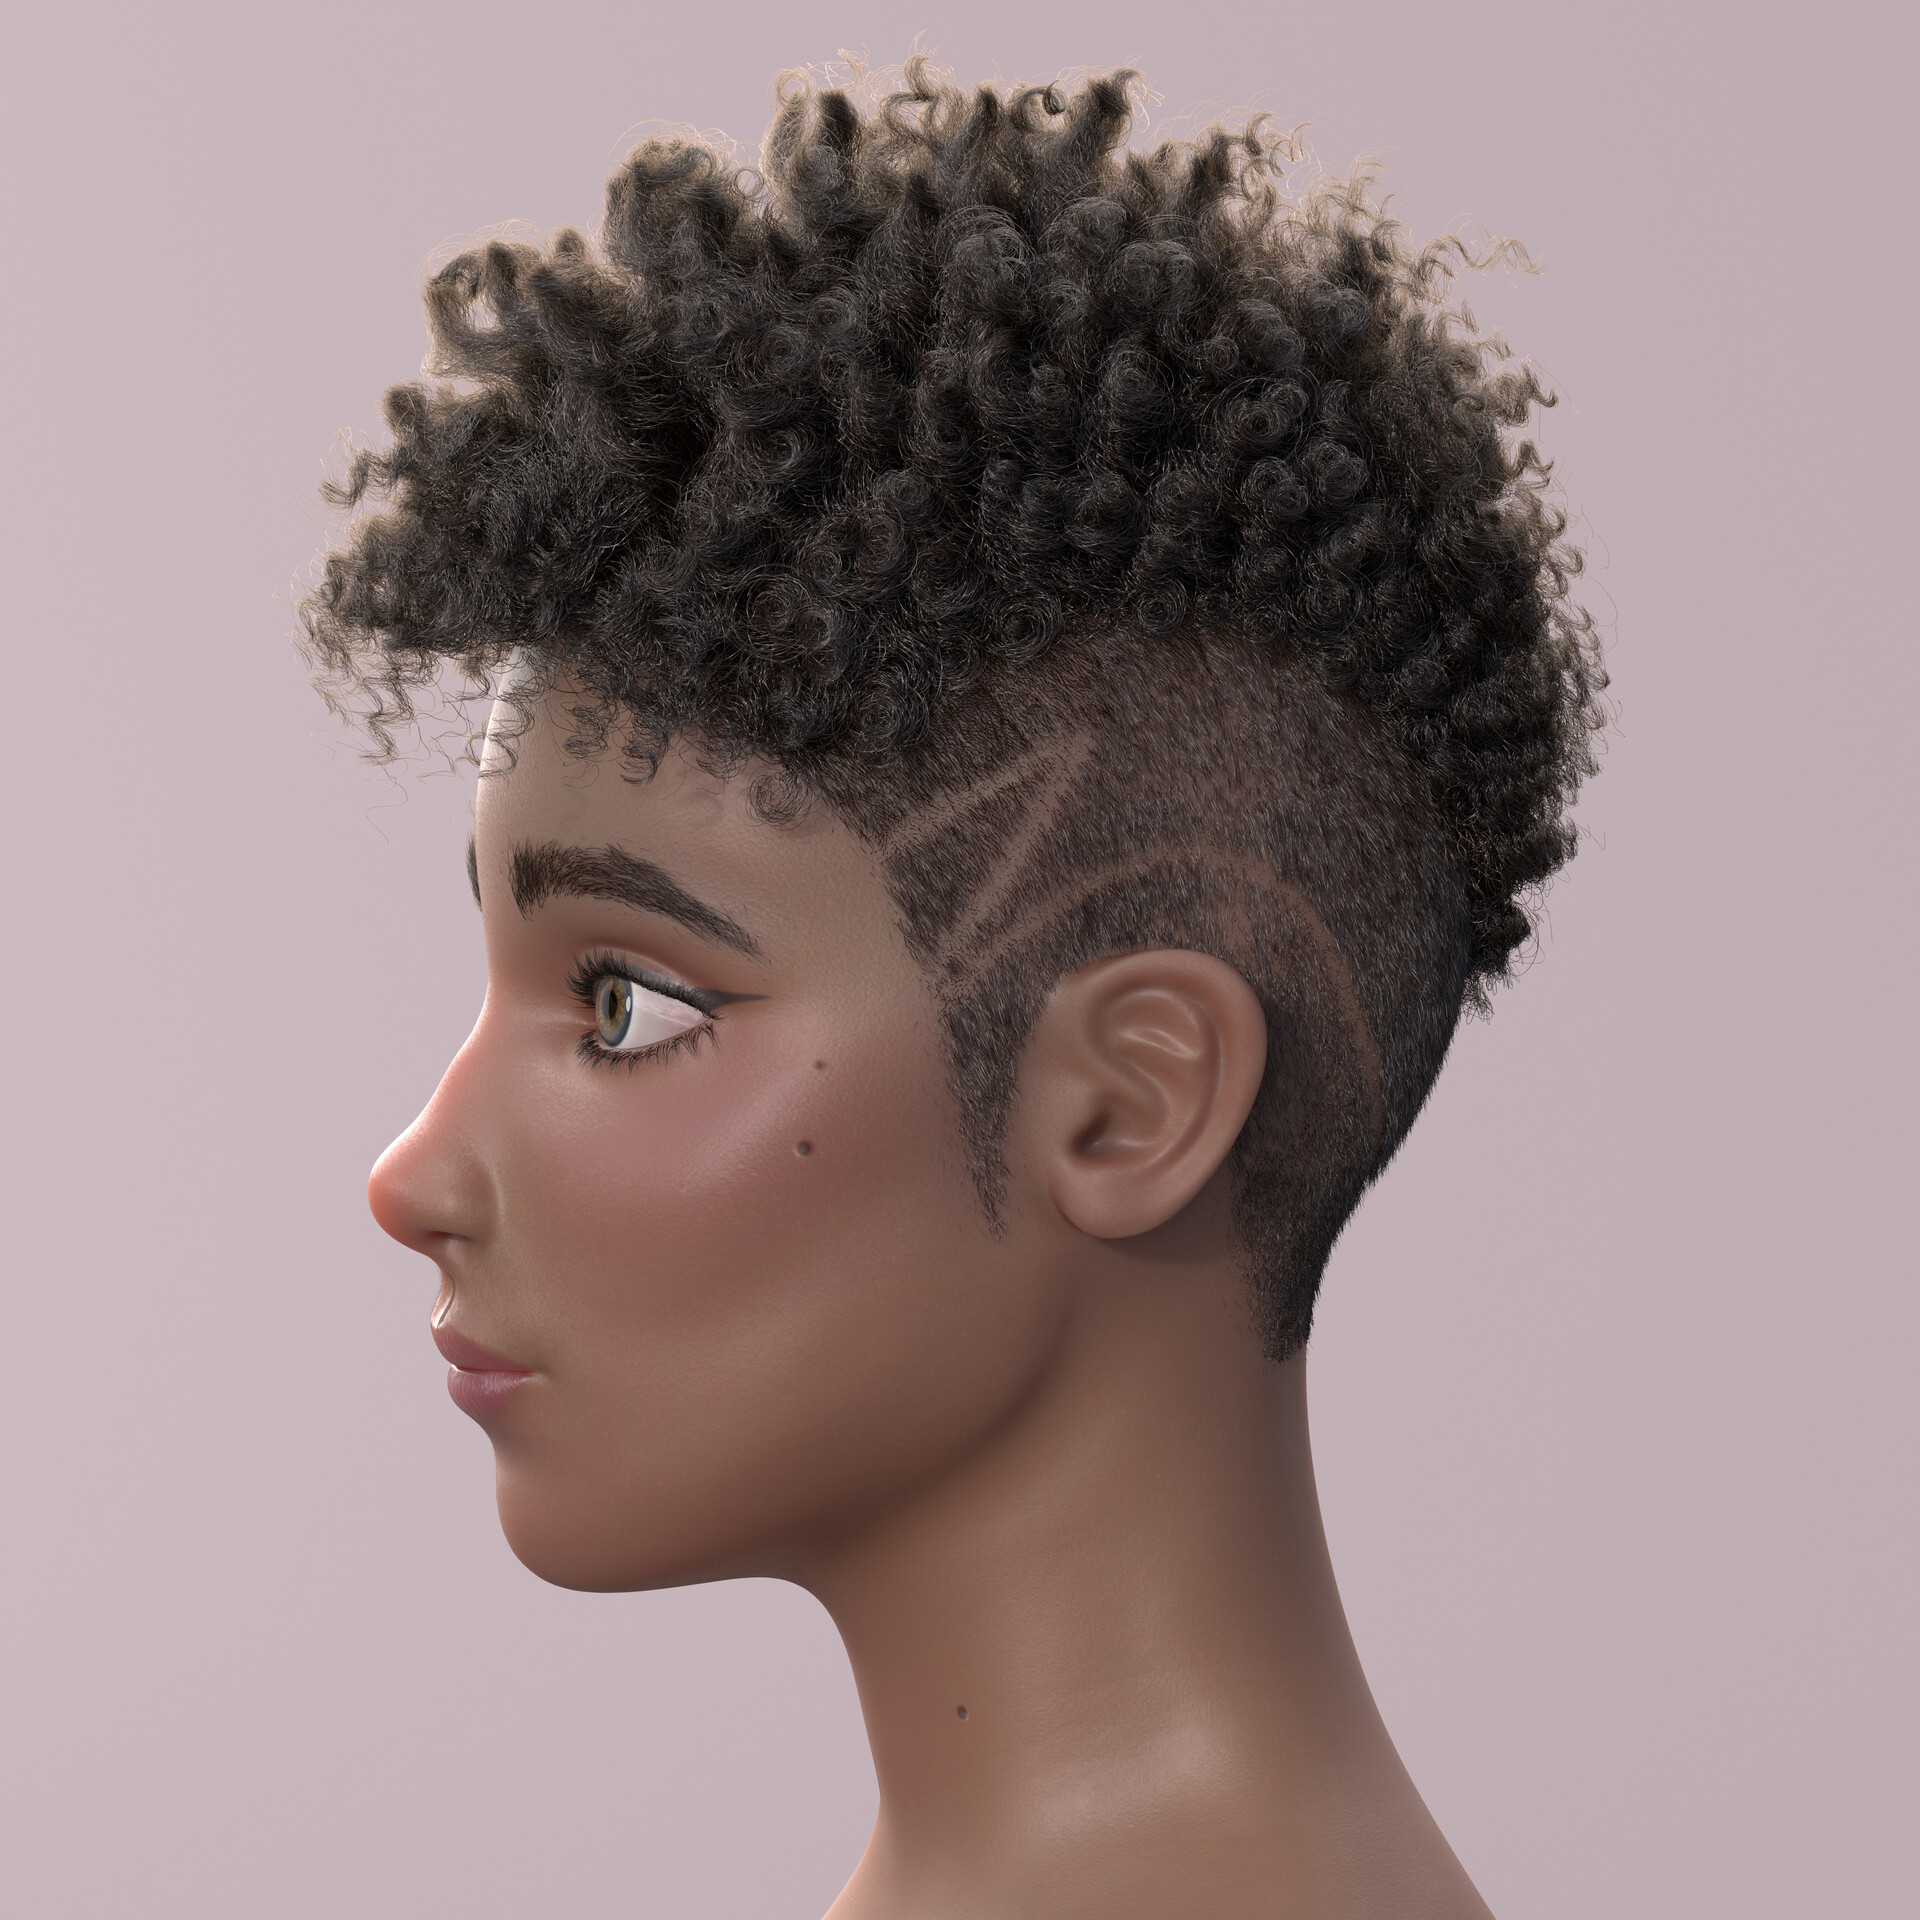 ArtStation - Short Curly Haired Woman